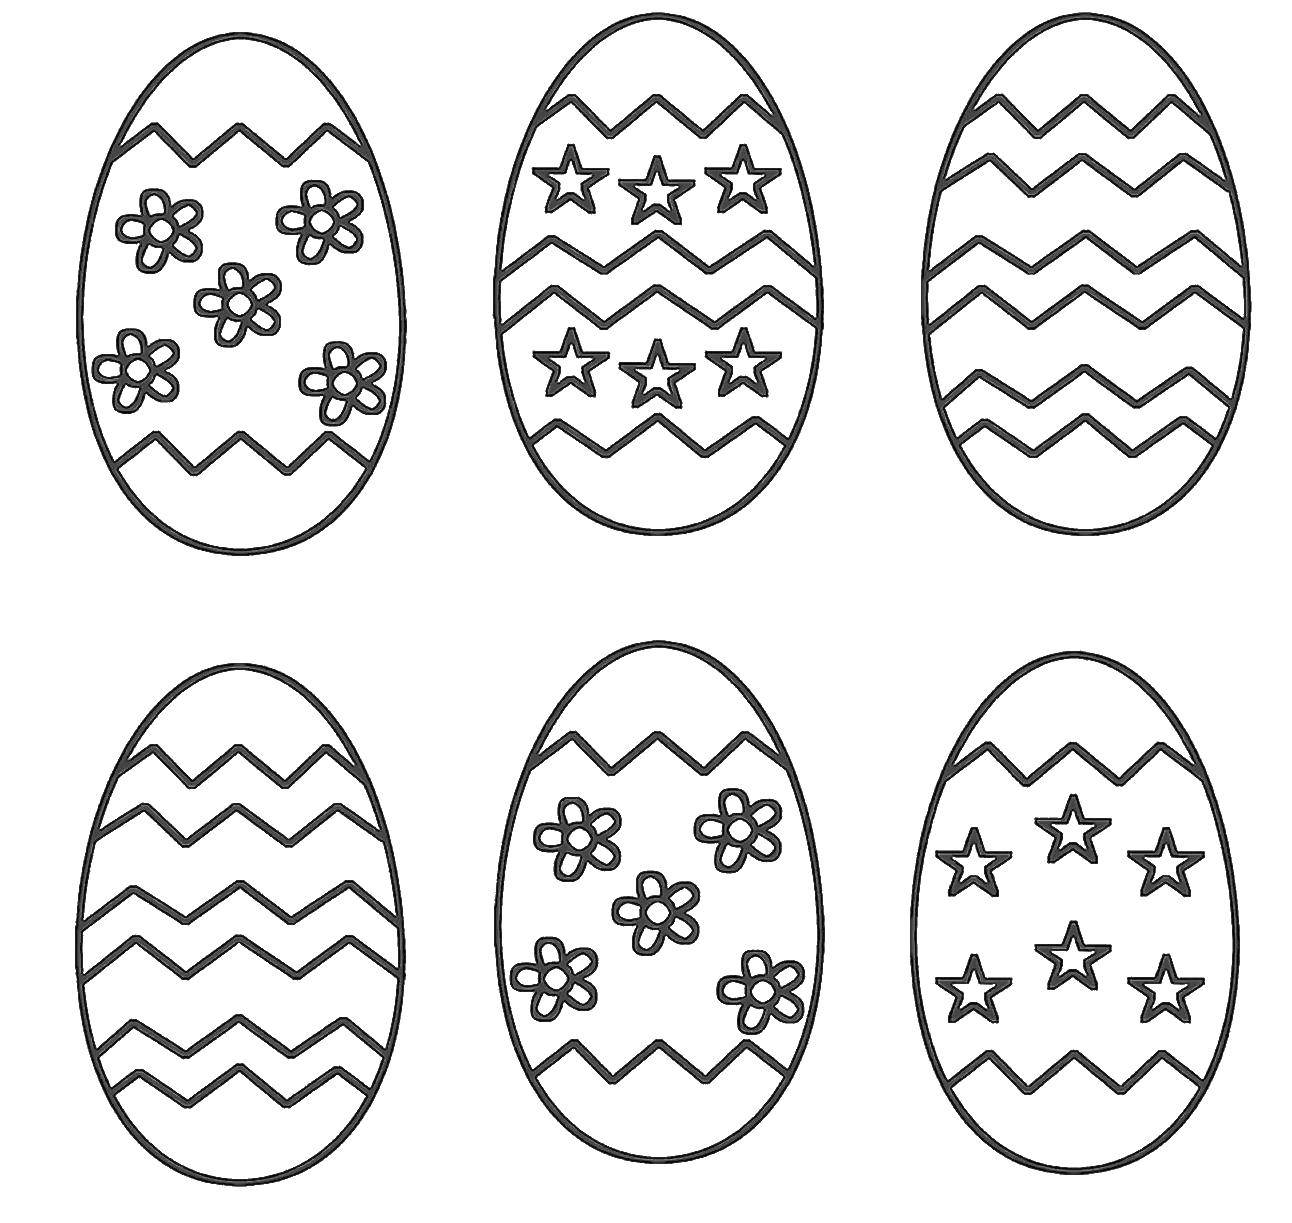 Coloring Different patterns on the eggs. Category Patterns for coloring eggs. Tags:  Easter, eggs, patterns.